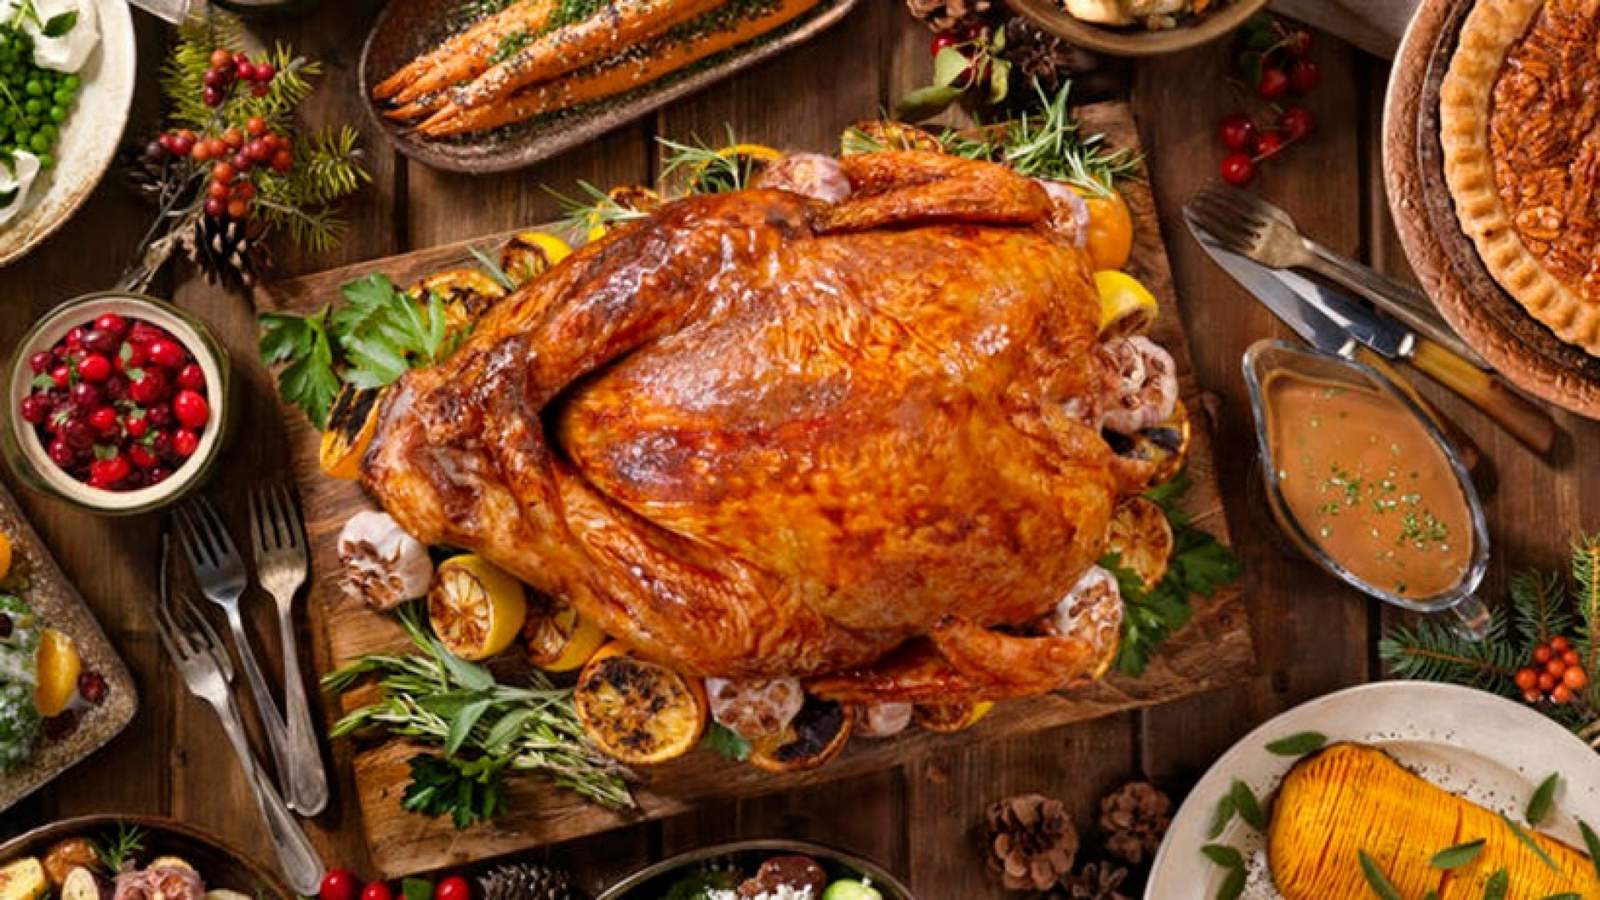 Rather than eat out or cook, you can enjoy a Hotel Roanoke Thanksgiving feast at home